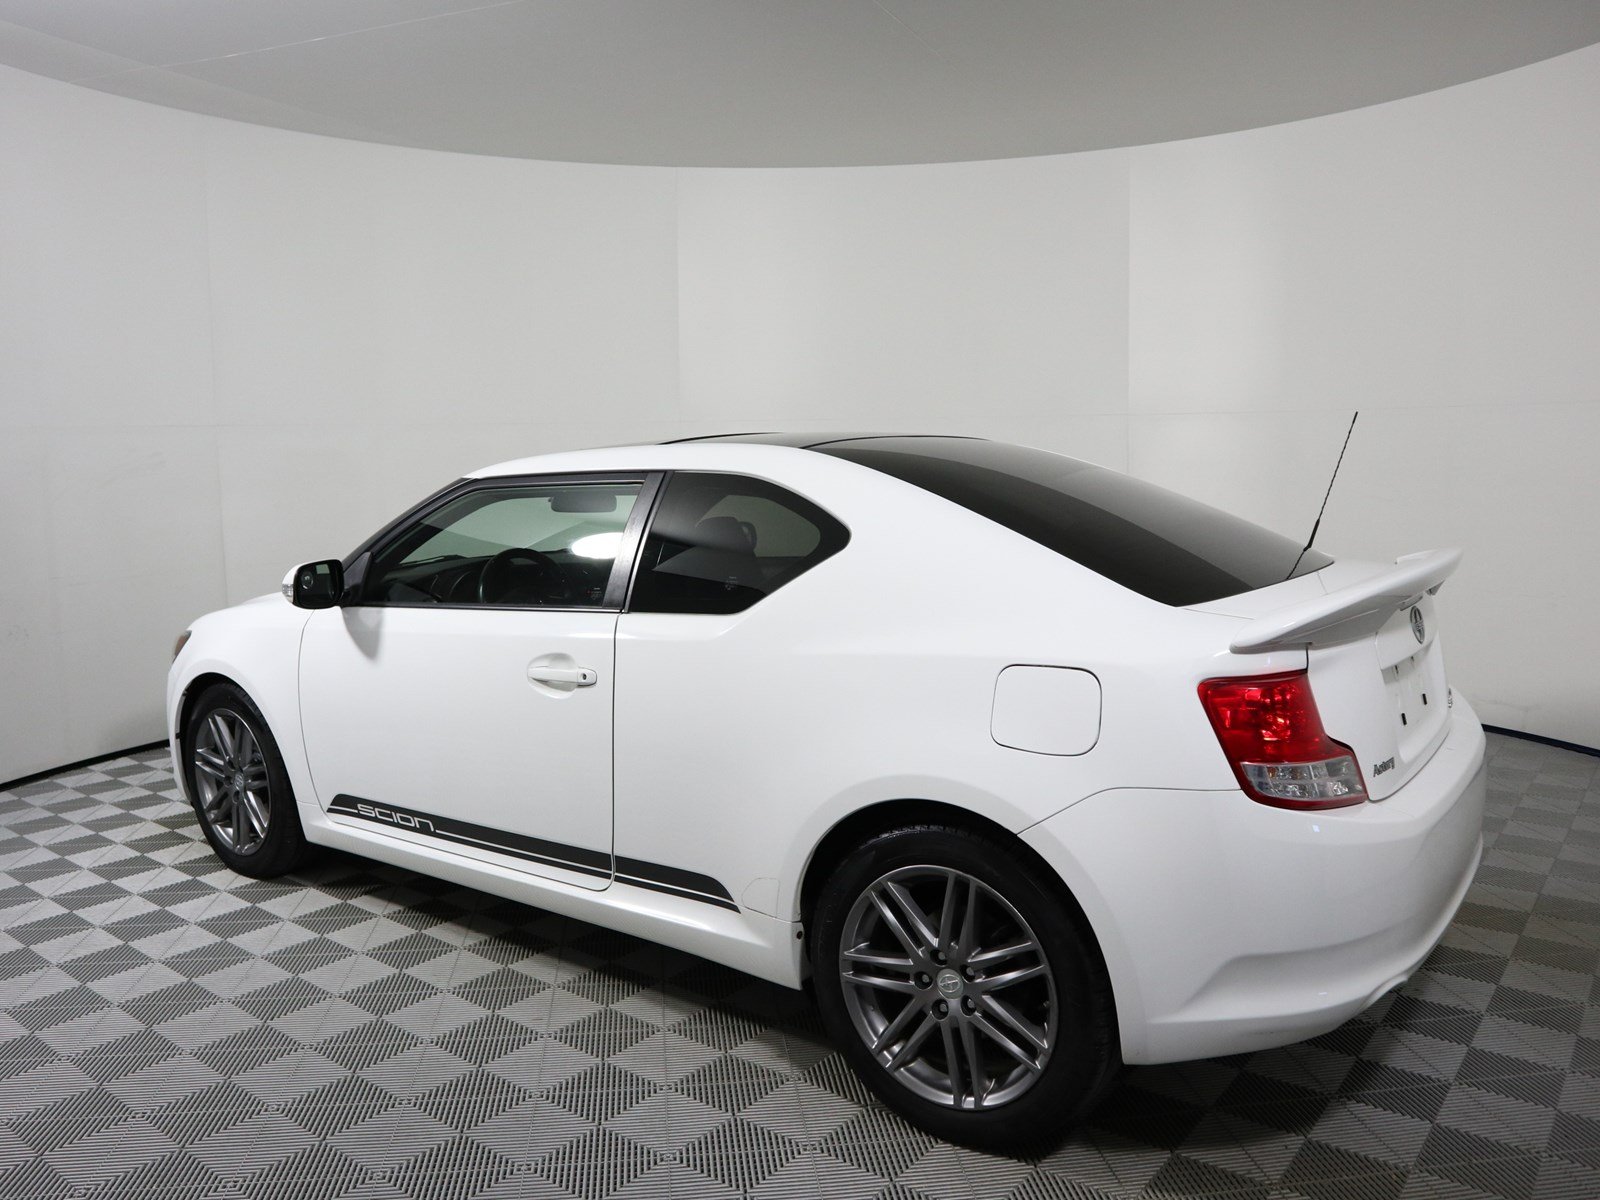 Pre-Owned 2012 Scion tC Hatchback in Parkersburg #M5980A | Astorg Auto